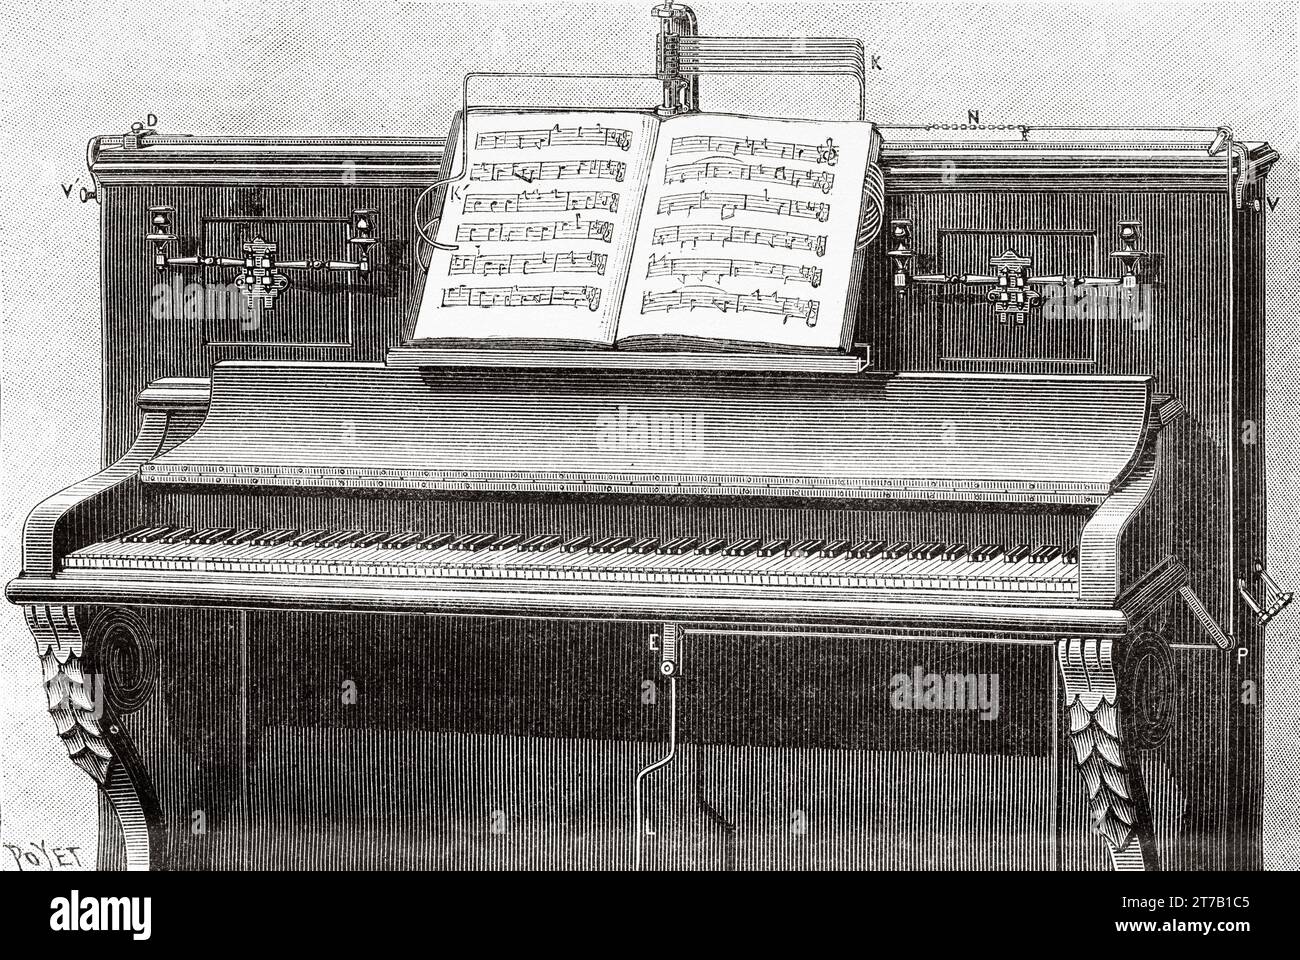 Automatic music sheet turner on a piano. Old illustration by Louis Poyet (1846-1913) from La Nature 1887 Stock Photo